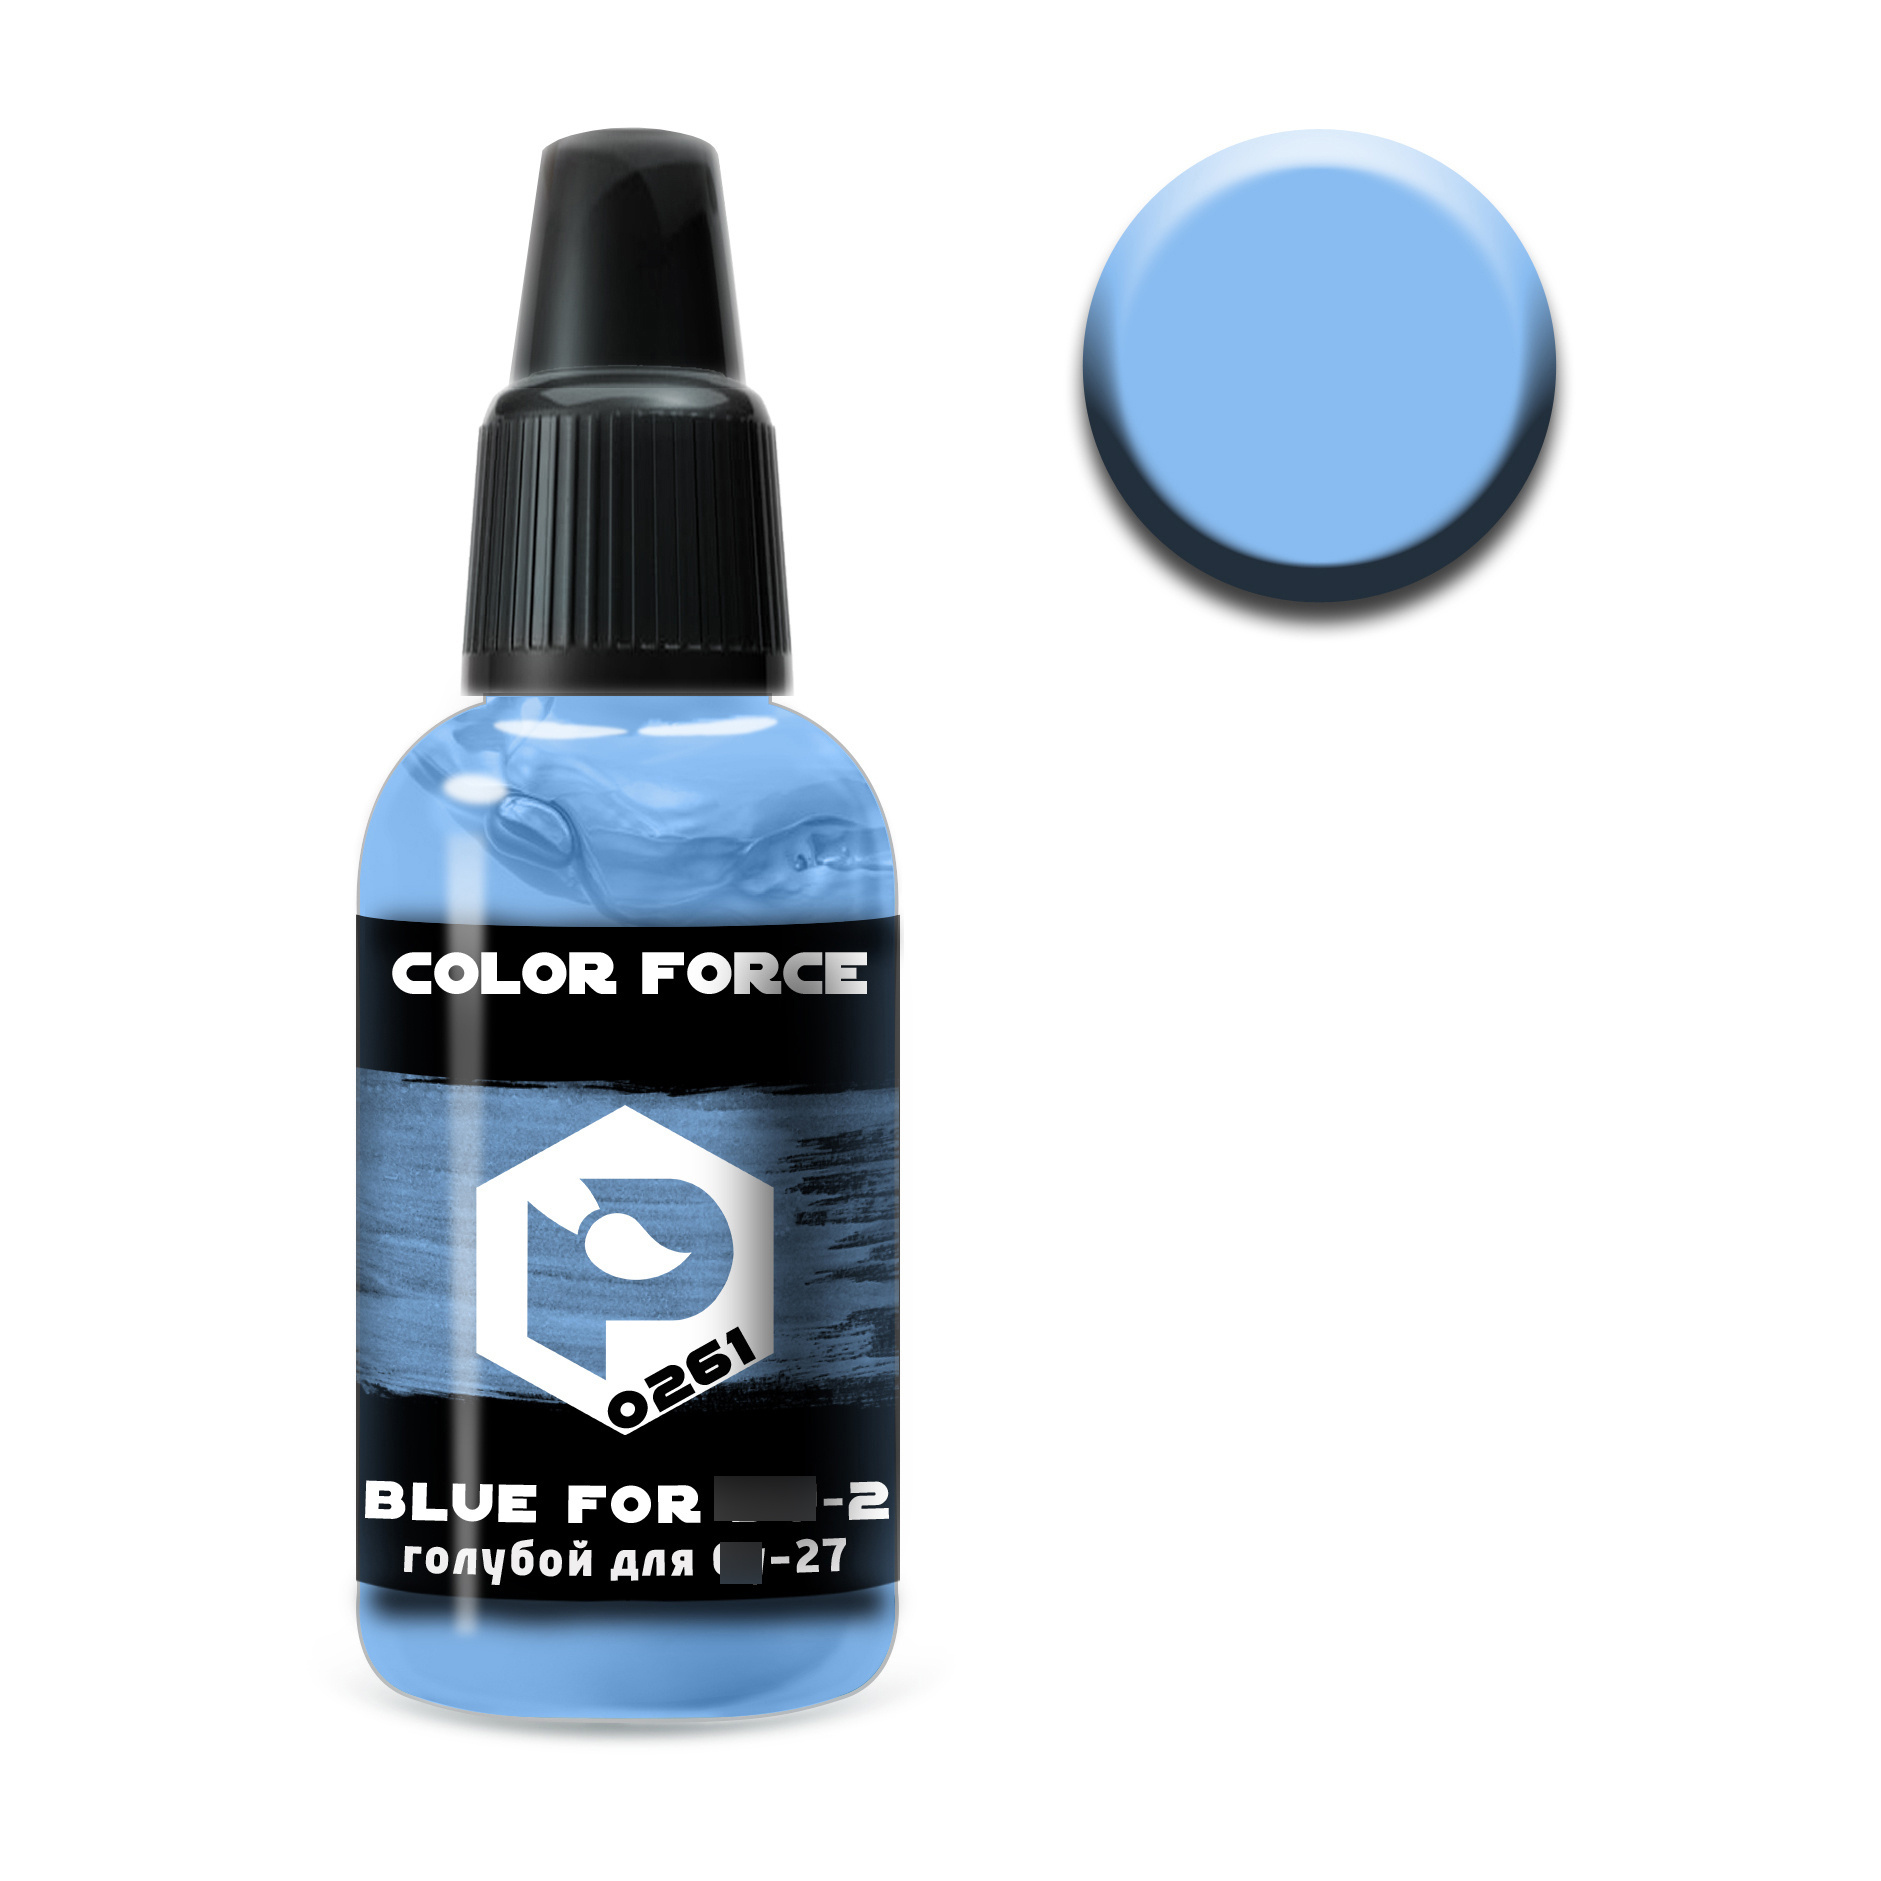 art.0261 Pacific88 Airbrush Paint Blue for Dry-27 (Blue for S. U.-27)